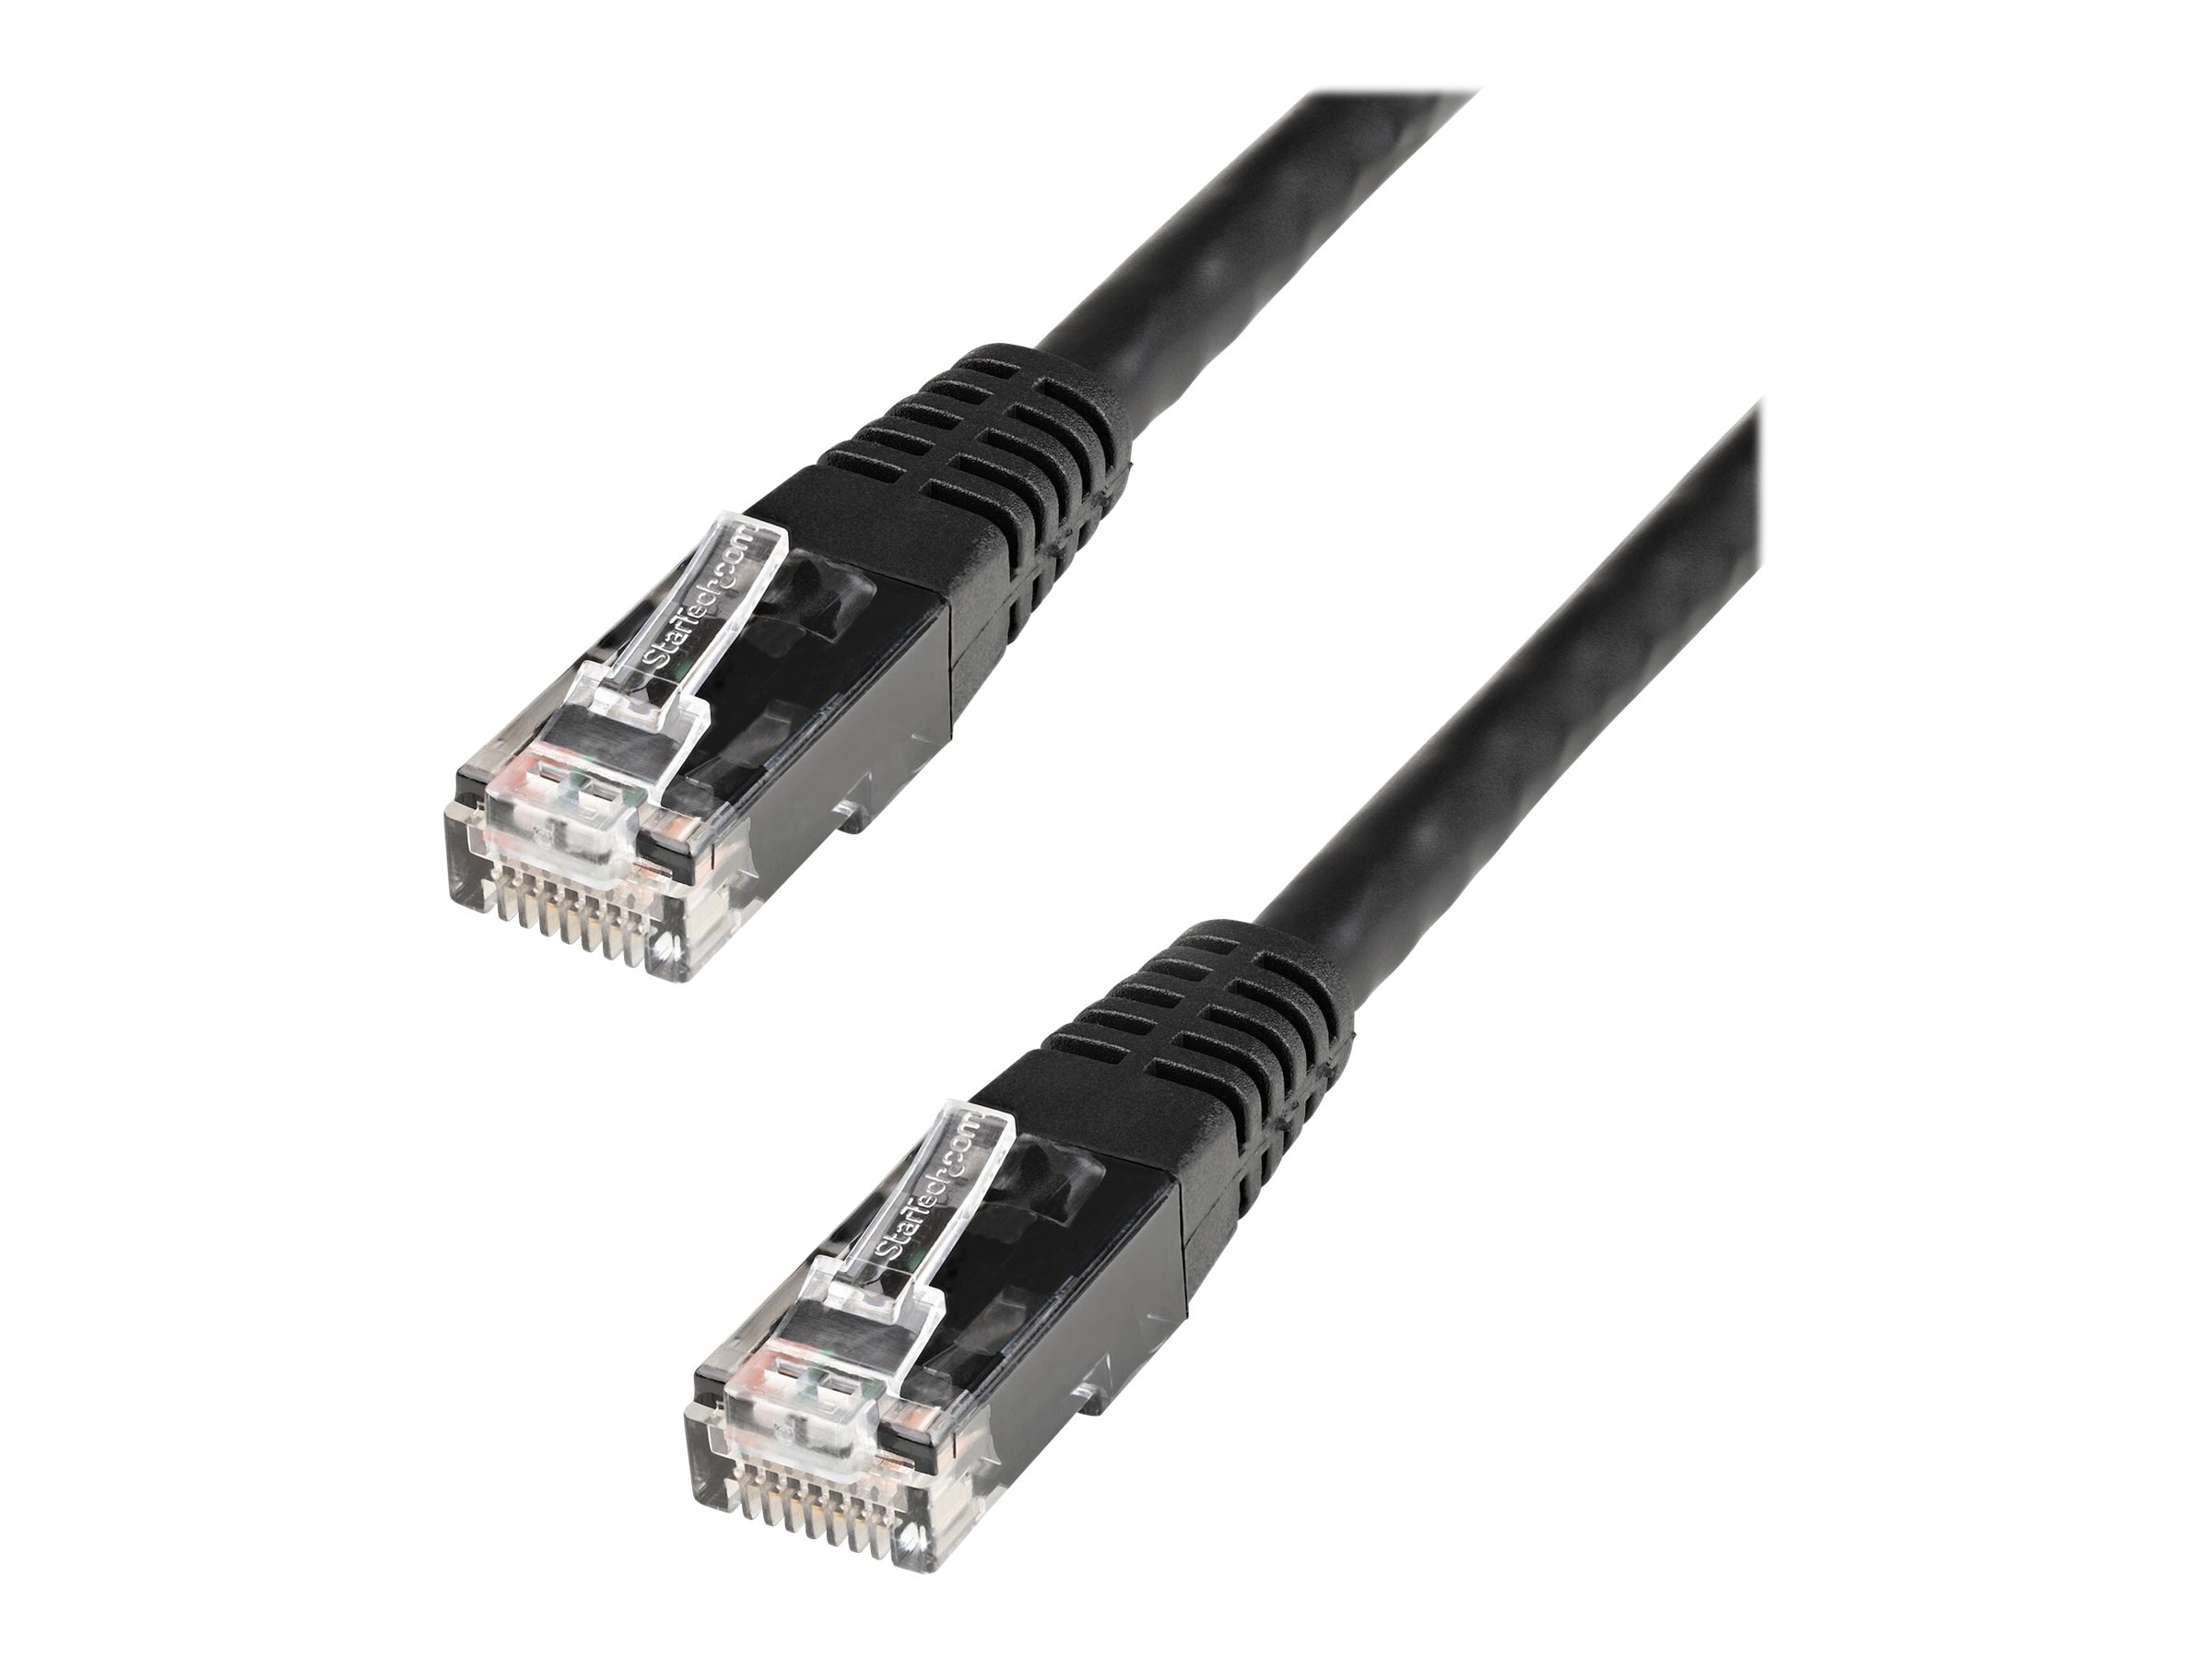 StarTech.com 6ft CAT6 Ethernet Cable, 10 Gigabit Molded RJ45 650MHz 100W PoE Patch Cord, CAT 6 10GbE UTP Network Cable with Strain Relief, Black, Fluke Tested/Wiring is UL Certified/TIA